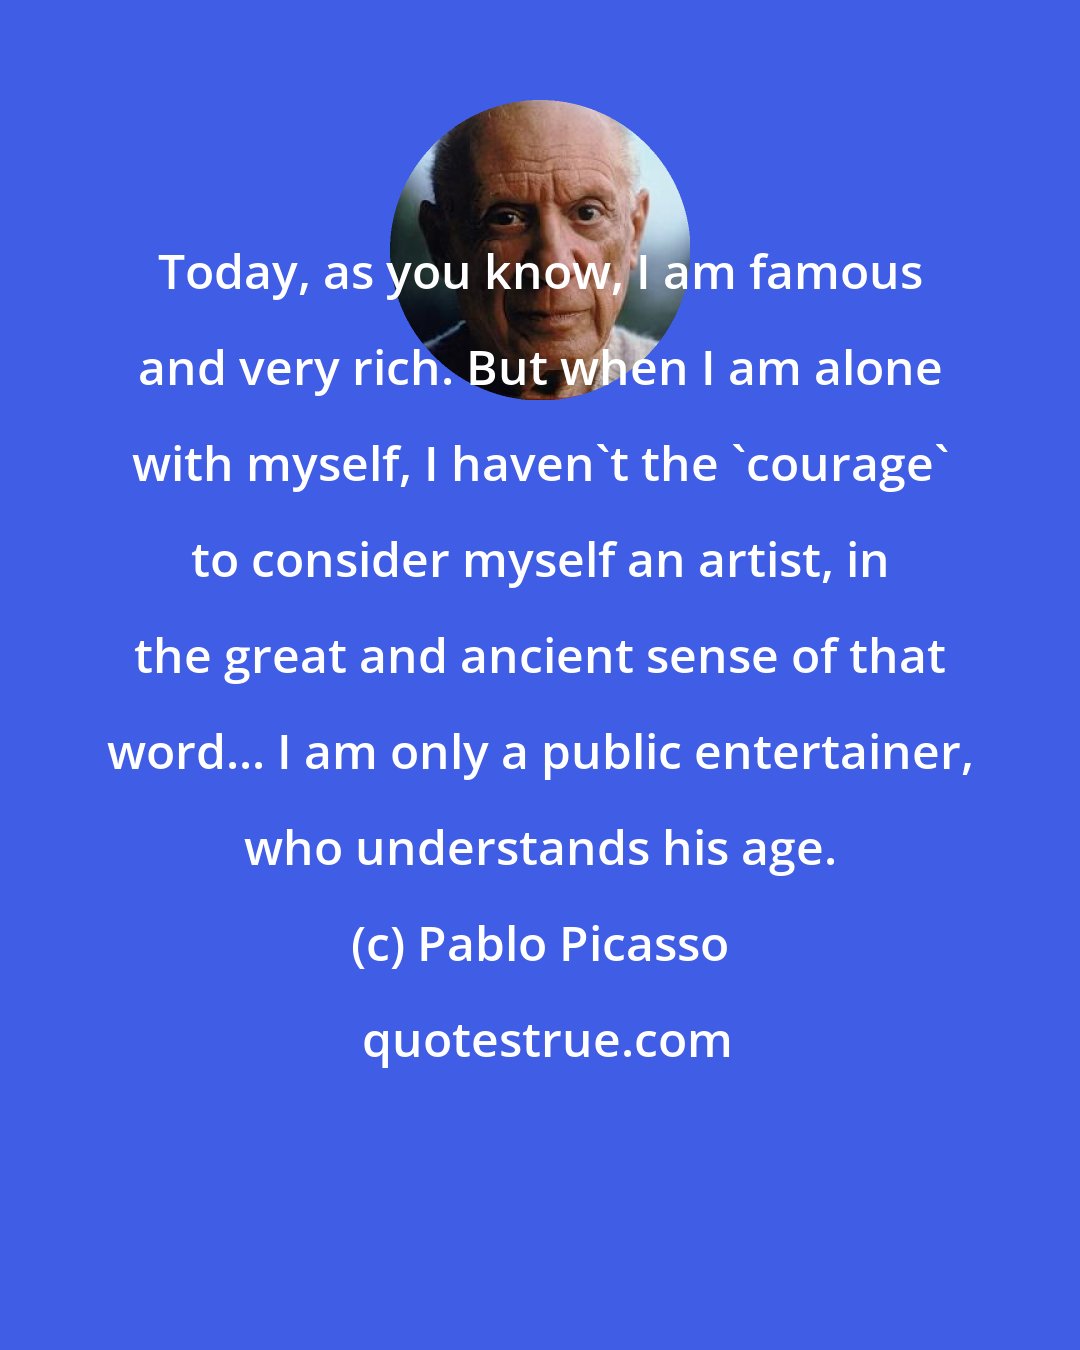 Pablo Picasso: Today, as you know, I am famous and very rich. But when I am alone with myself, I haven't the 'courage' to consider myself an artist, in the great and ancient sense of that word... I am only a public entertainer, who understands his age.